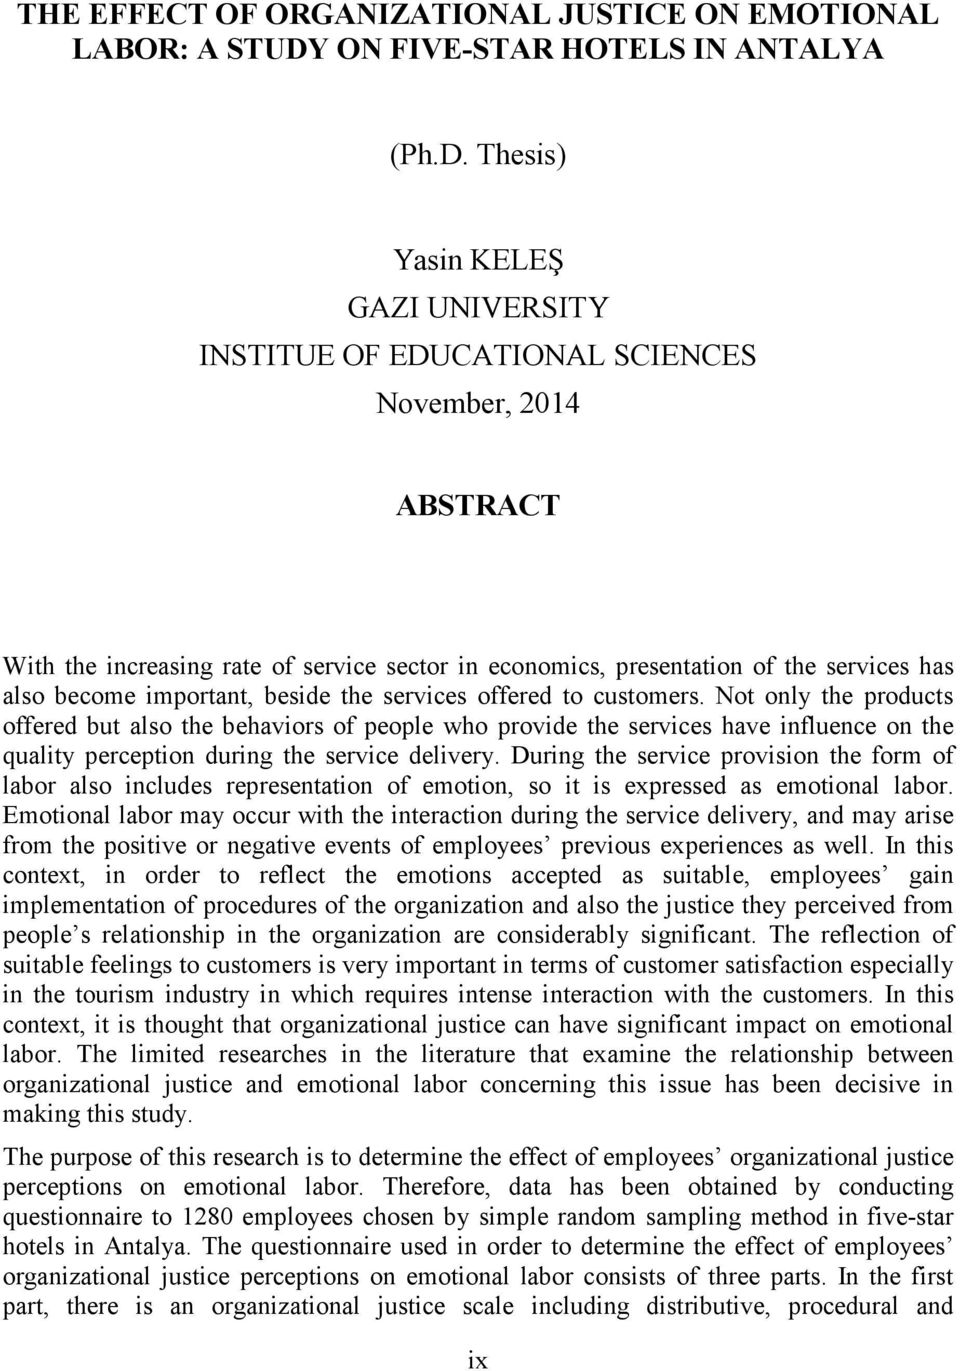 Thesis) Yasin KELEŞ GAZI UNIVERSITY INSTITUE OF EDUCATIONAL SCIENCES November, 2014 ABSTRACT With the increasing rate of service sector in economics, presentation of the services has also become